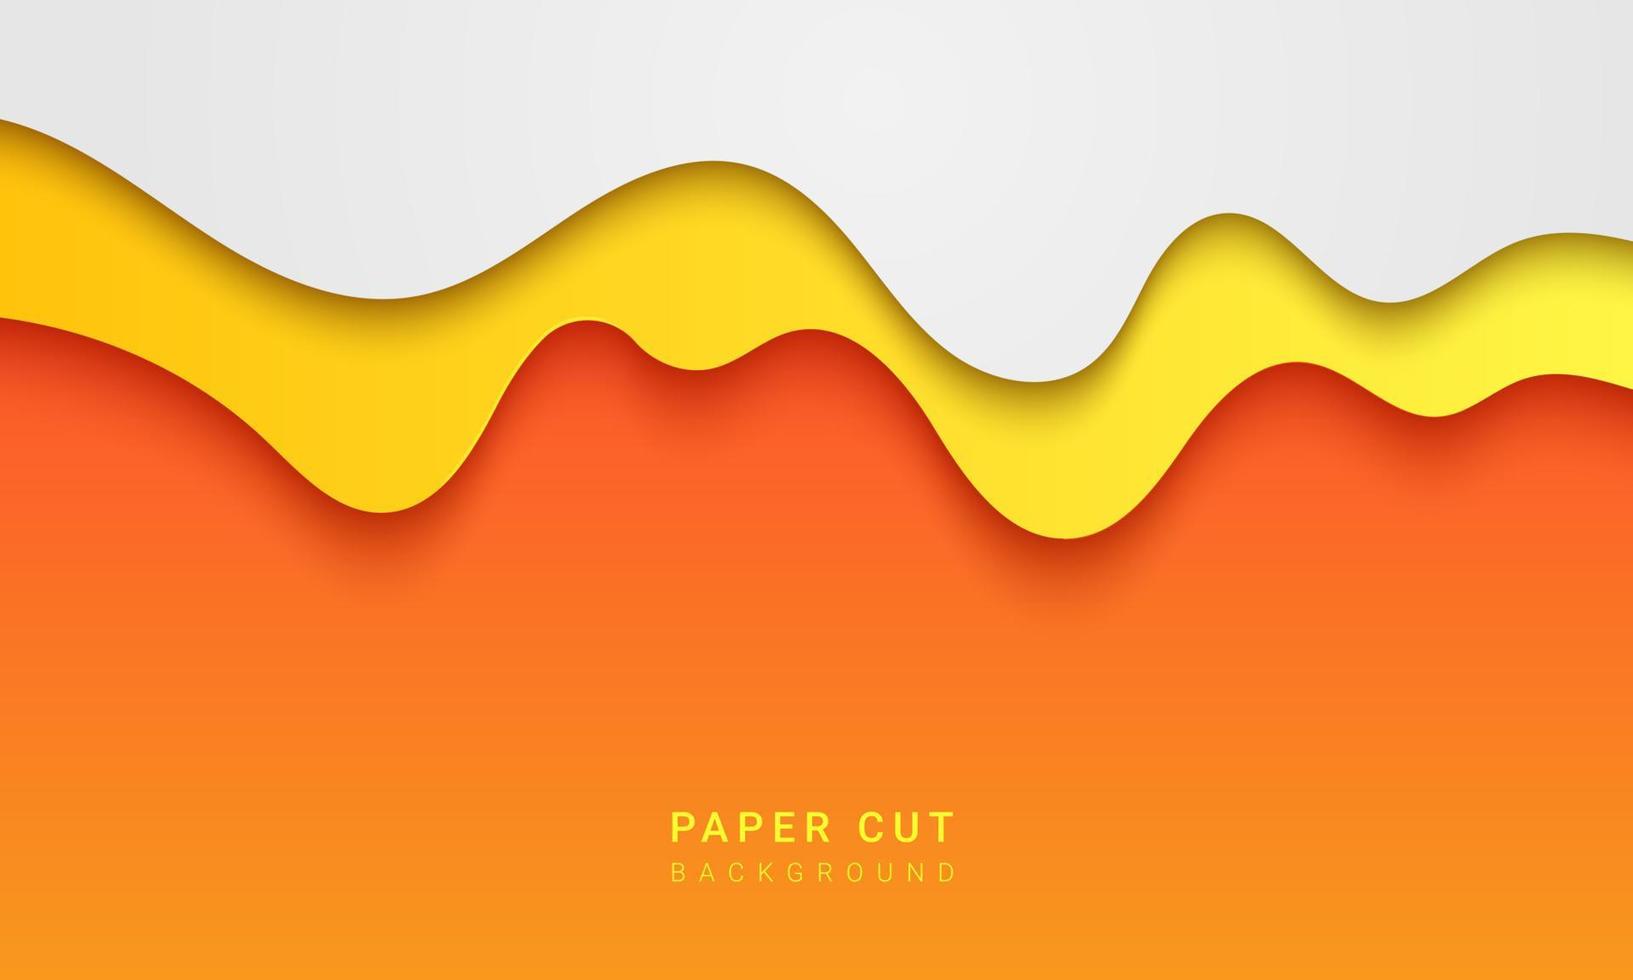 Abstract paper cut orange vector design, banner pattern, background template. Suitable for various background design, template, banner, poster, presentation, etc.